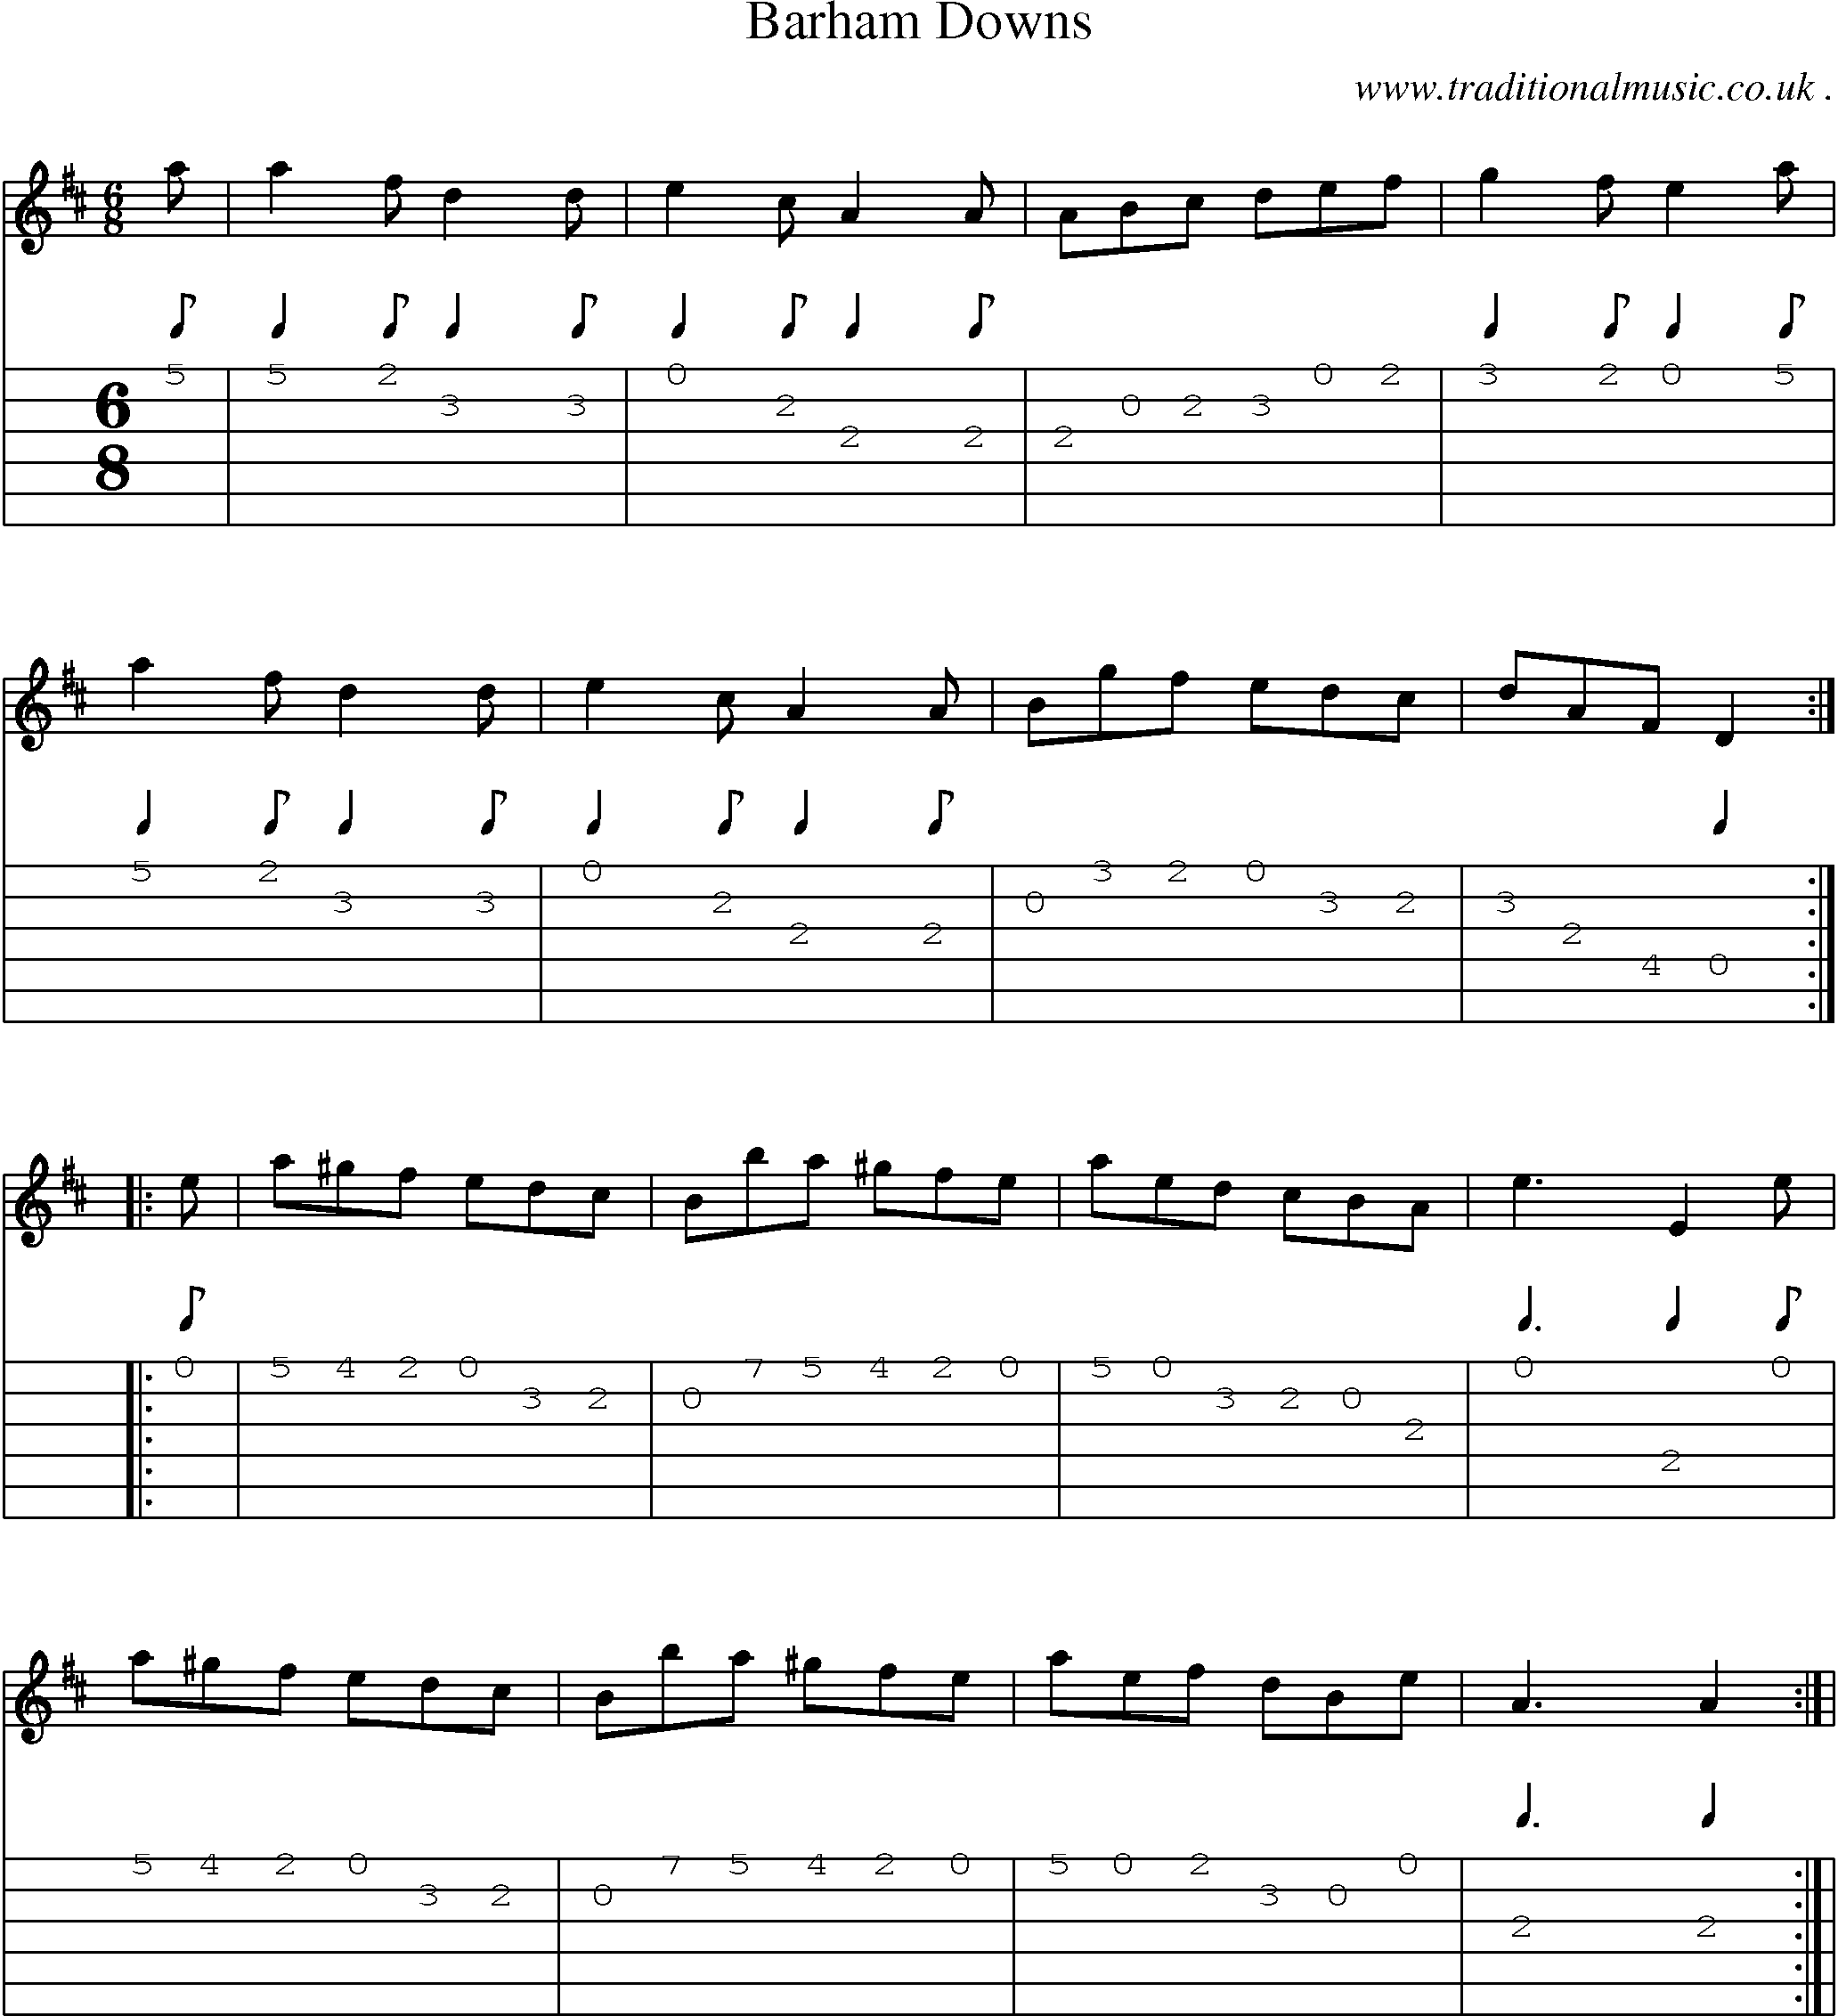 Sheet-Music and Guitar Tabs for Barham Downs